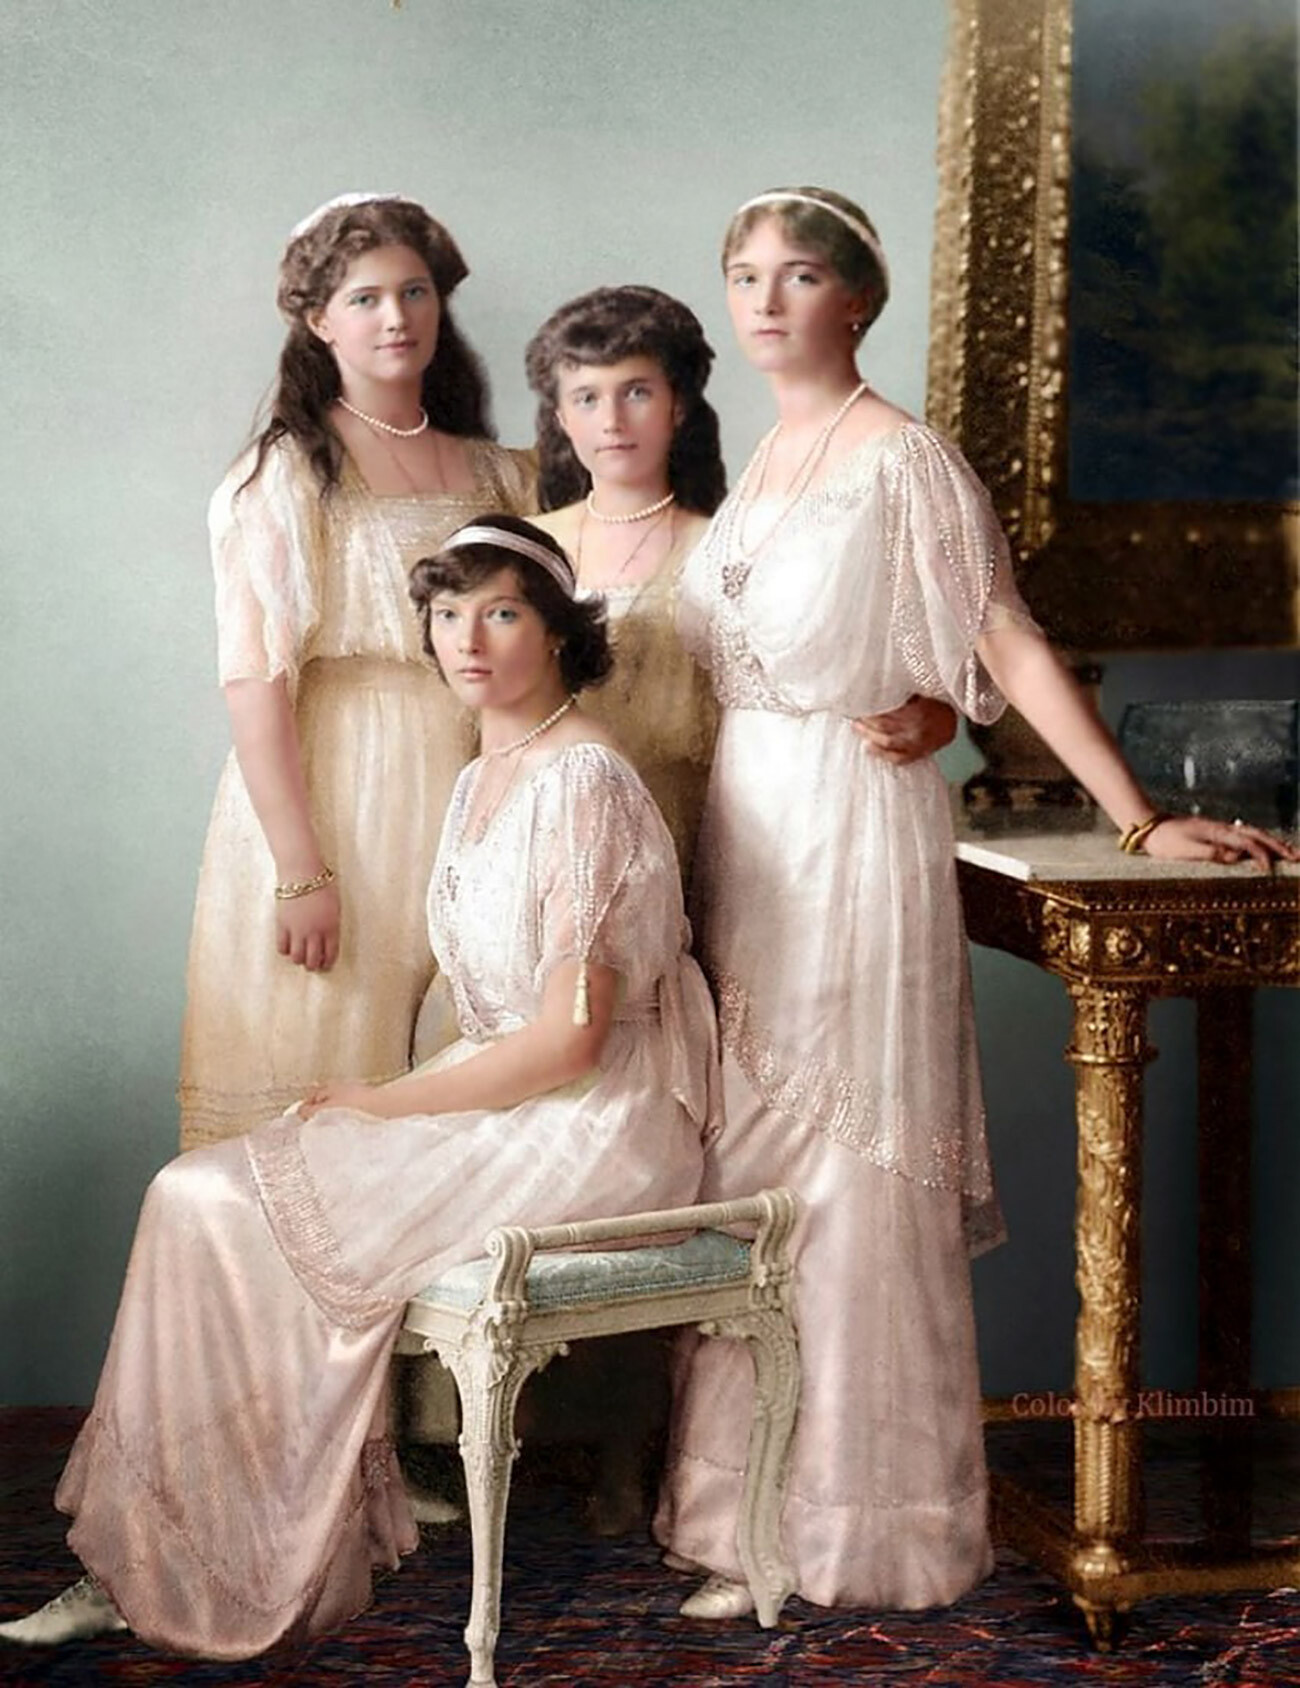 Tsar Nicholas II's children: What we know about them (PHOTOS) - Russia  Beyond